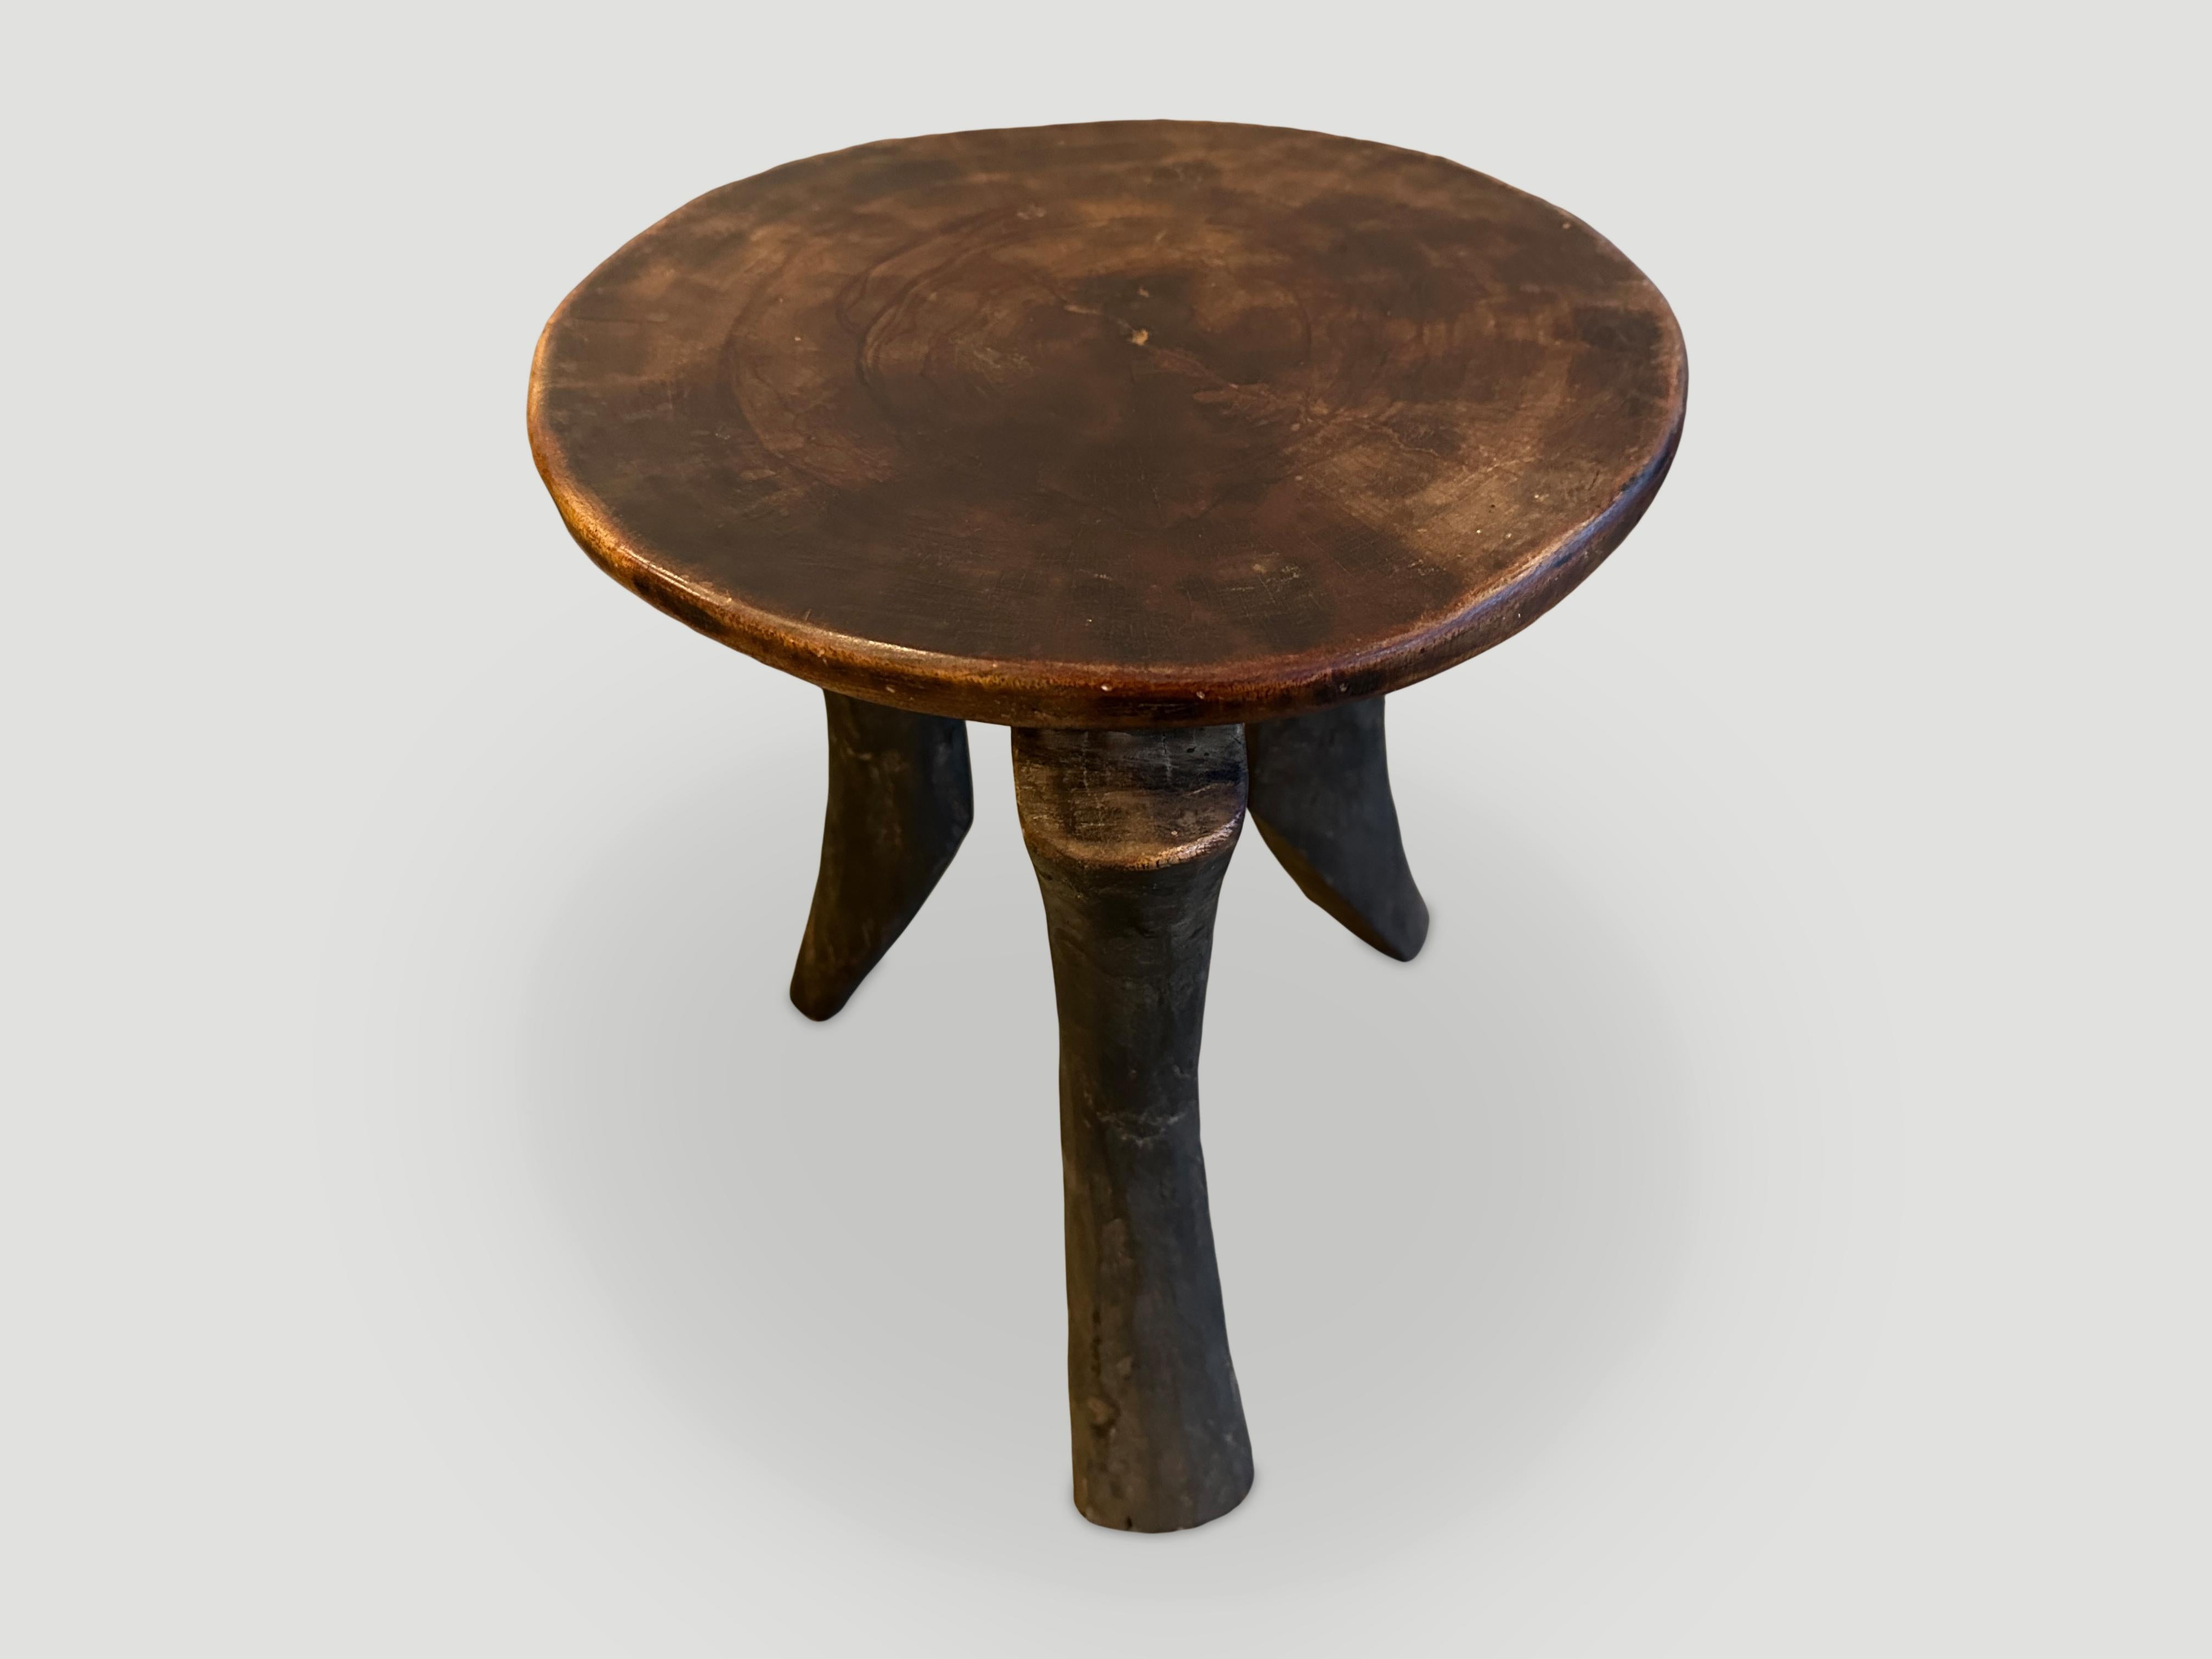 Tribal Andrianna Shamaris Antique Wooden African Side Table